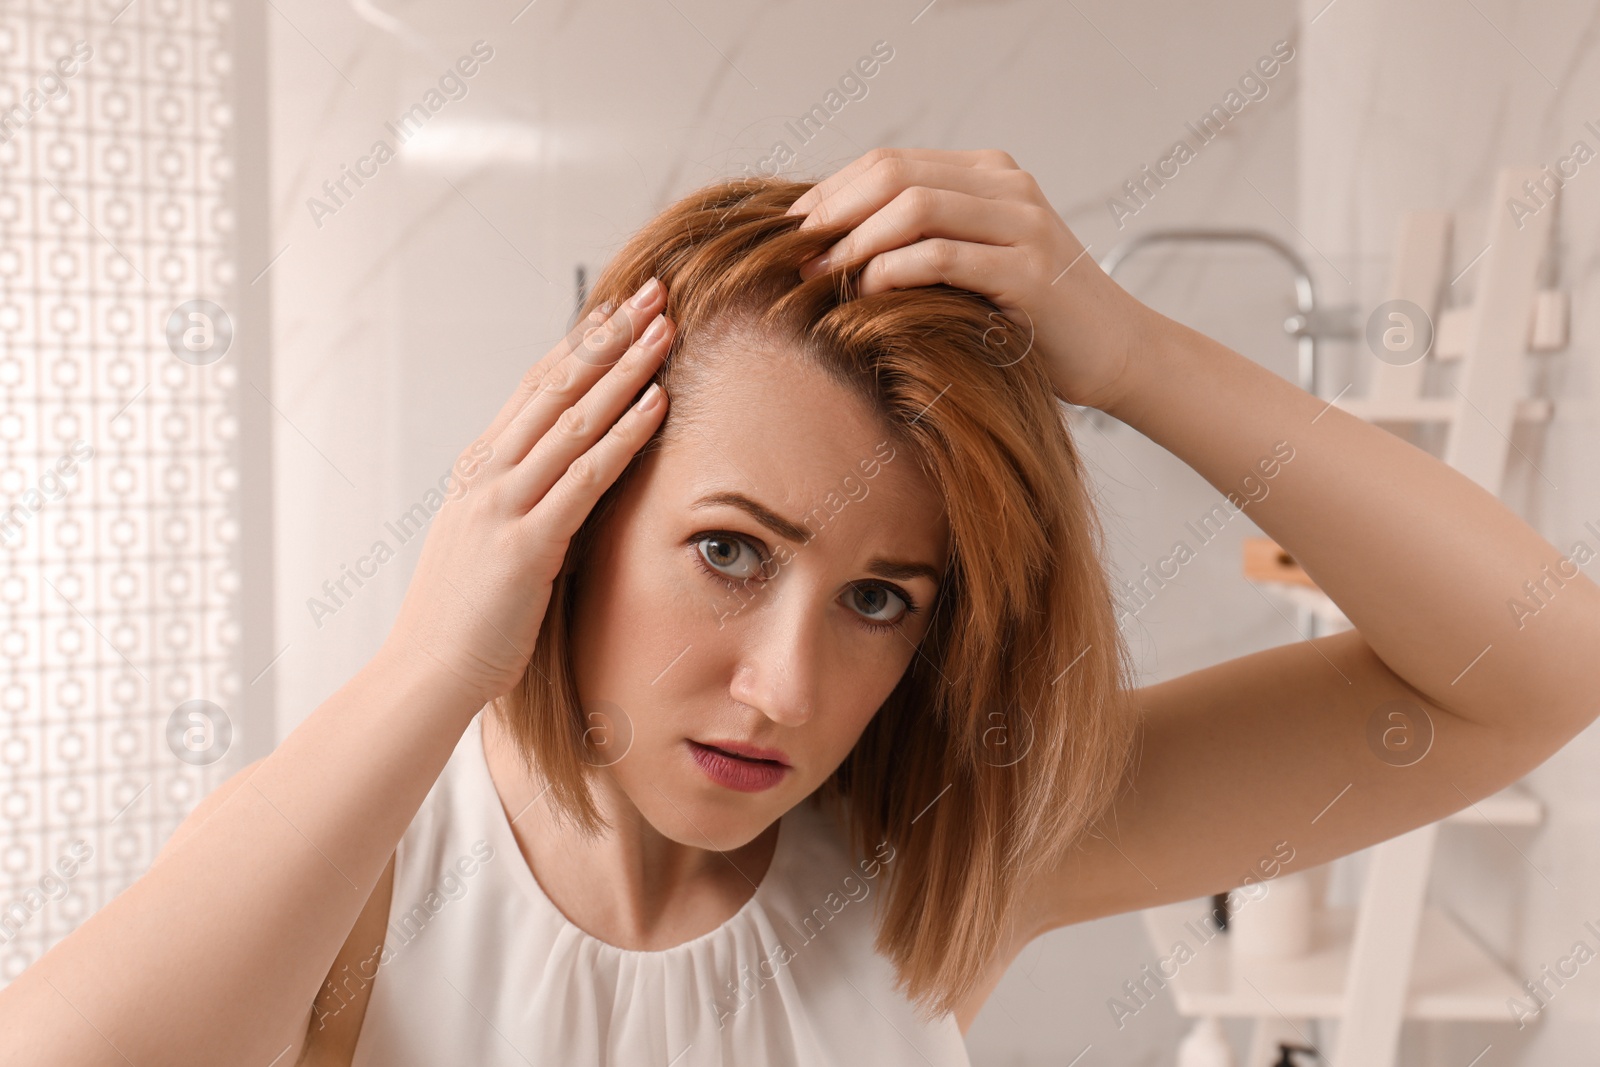 Photo of Sad woman suffering from baldness at home